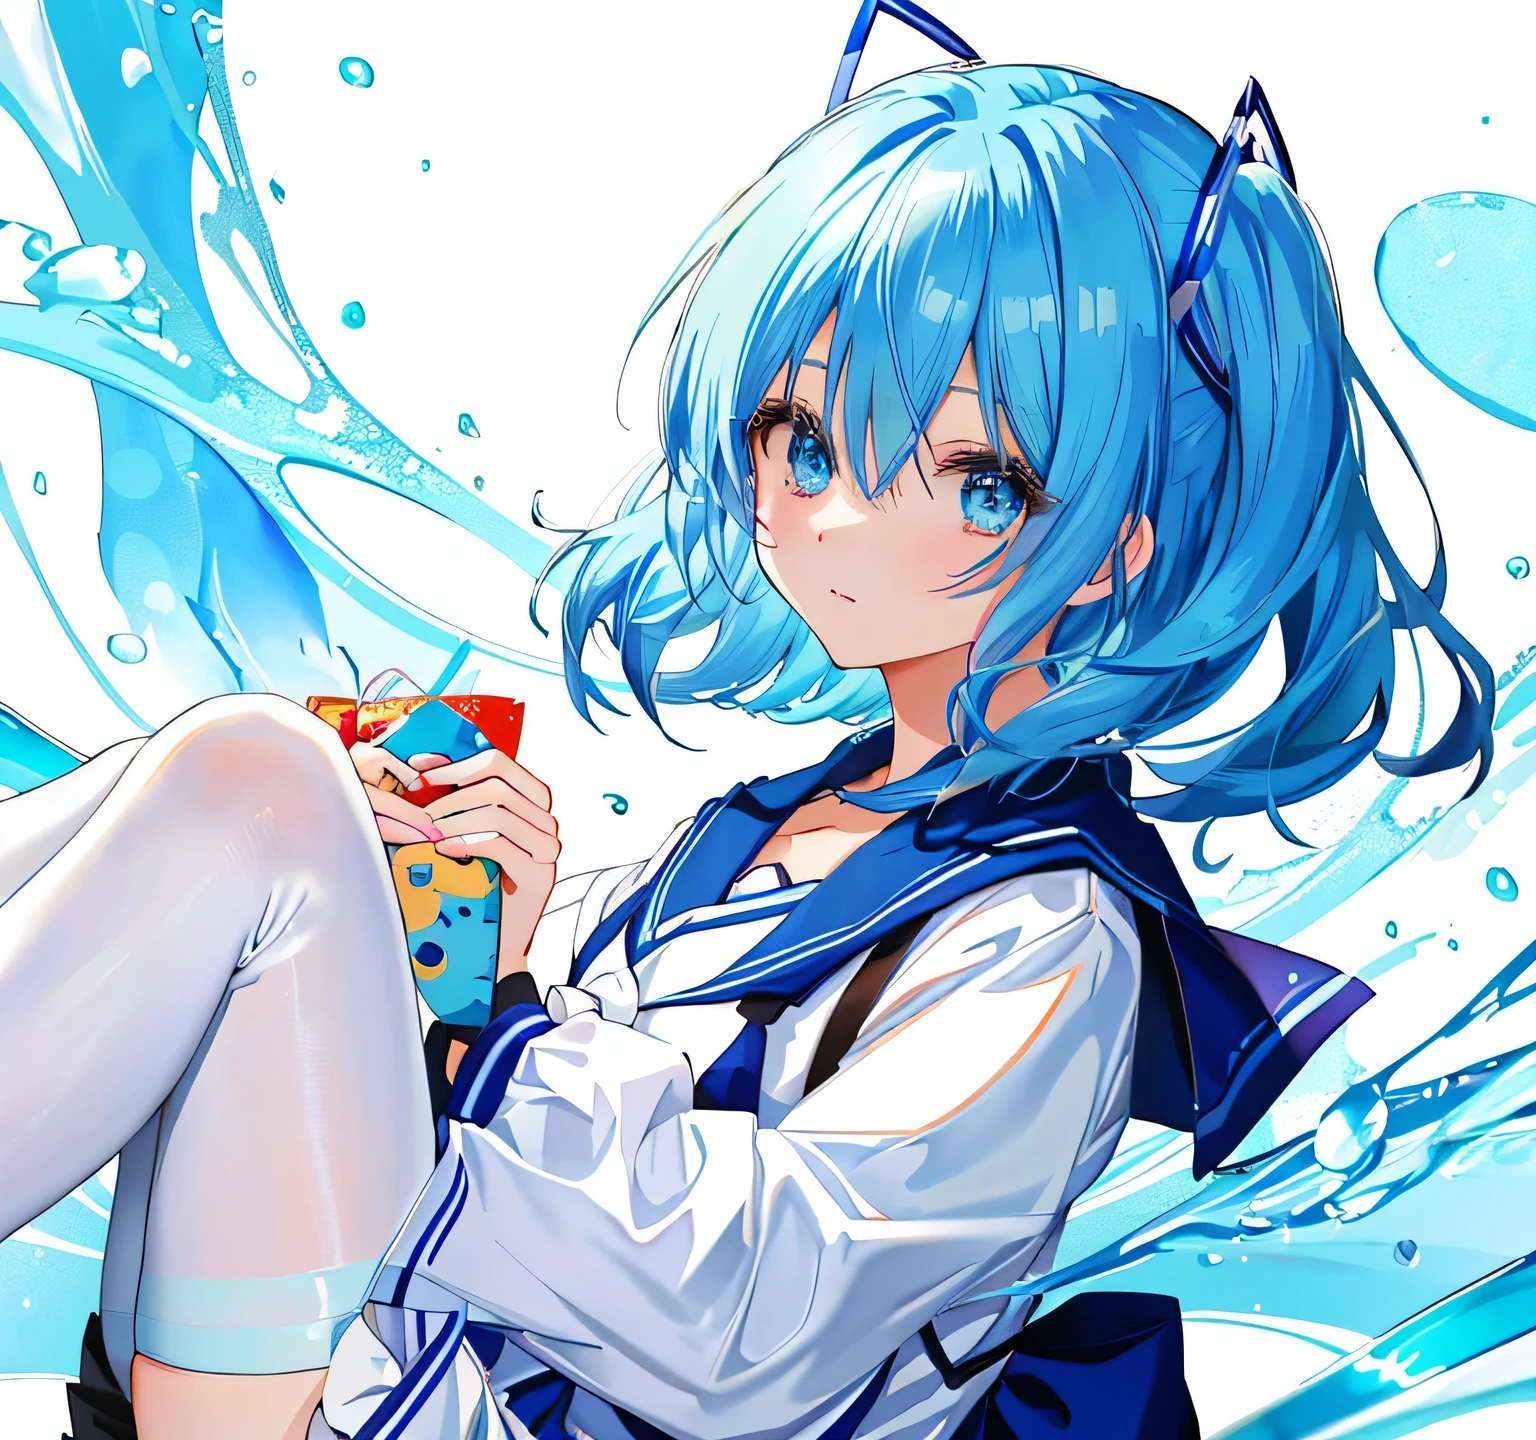 Anime girl with blue hair and blue eyes holding a donut, she has a cute expressive face, Young anime girl close up, anime Mo artstyle, Screenshot of anime 2 0 1 9, anime image of a cute girl, Tensei Shitara Slime Datta Ken, cute anime face, Anime portrait of Cirno, Very cute anime girl face, Fa chyan, mofu mofu, blue hair, cute  like face